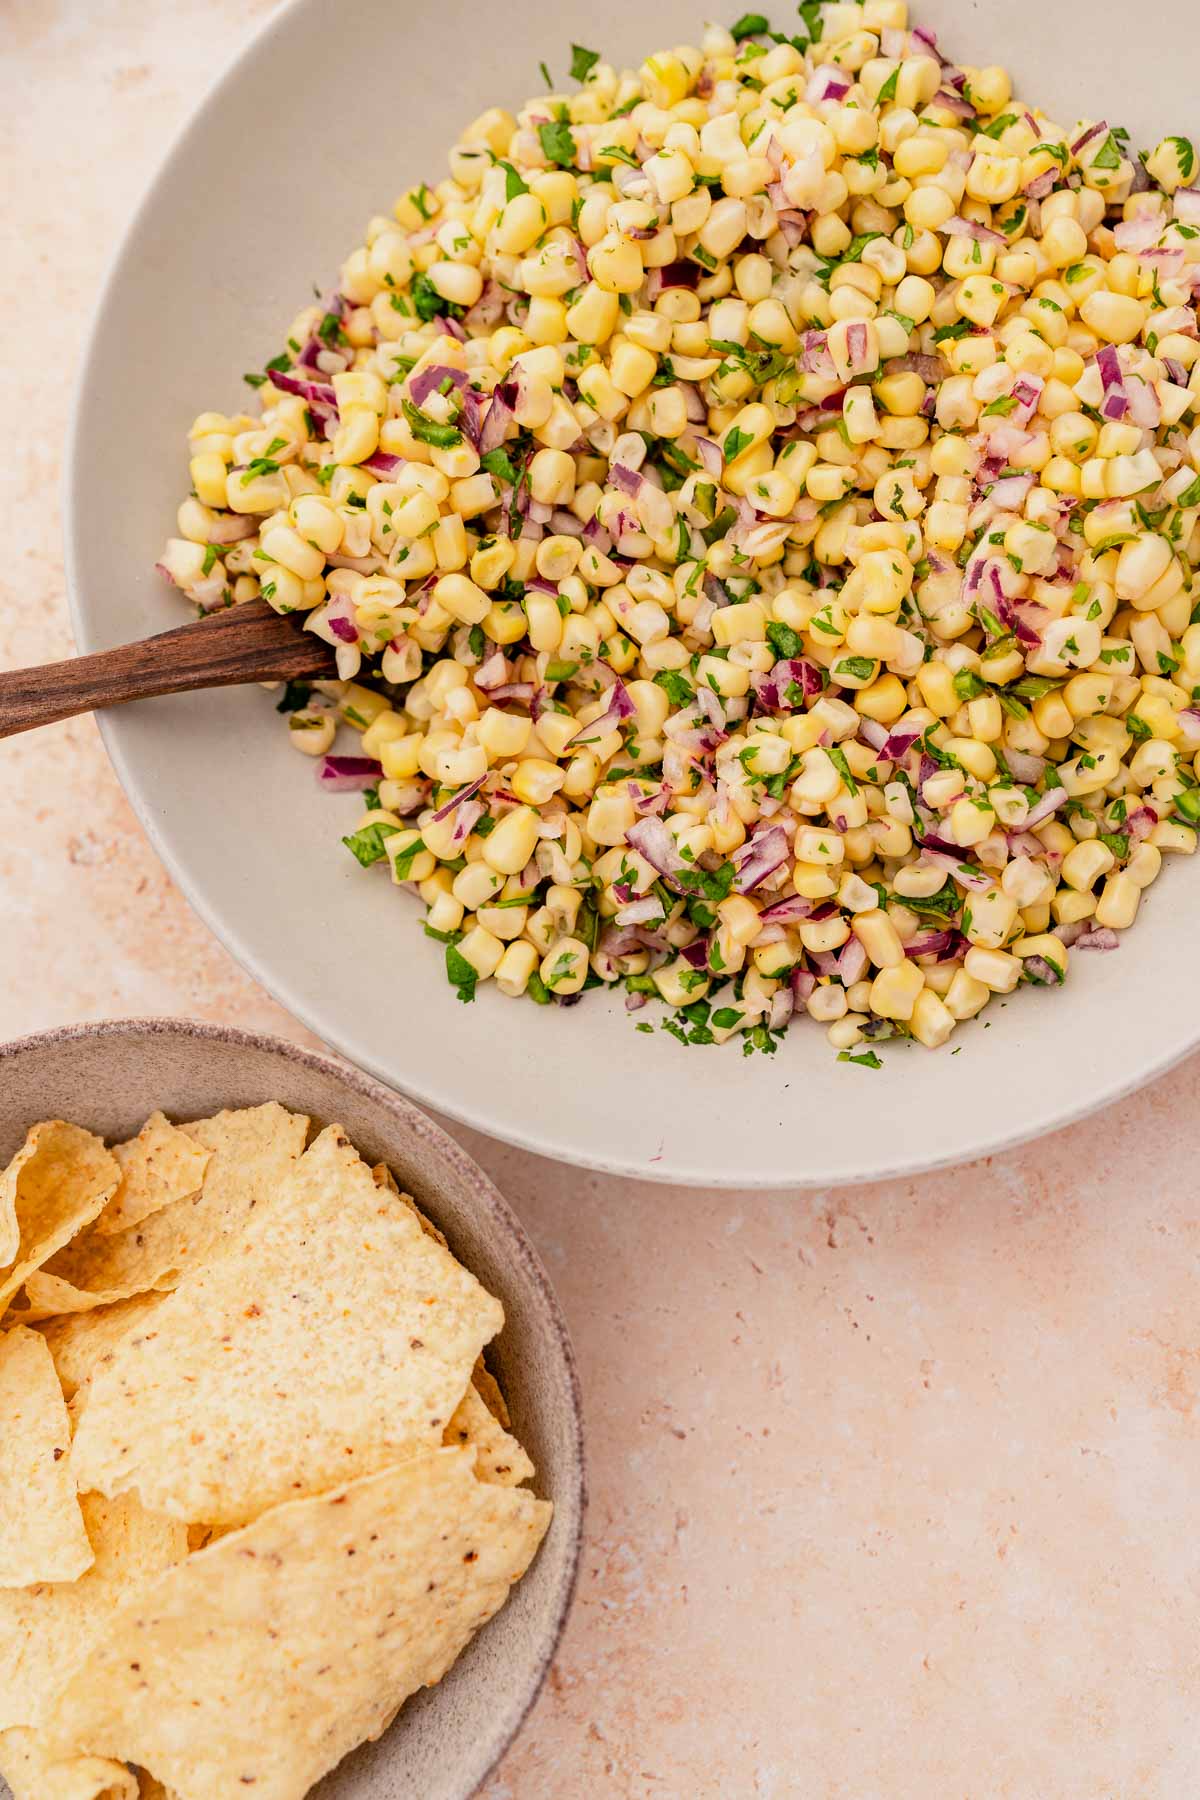 A bowl of corn salad with chipotle tortilla chips.